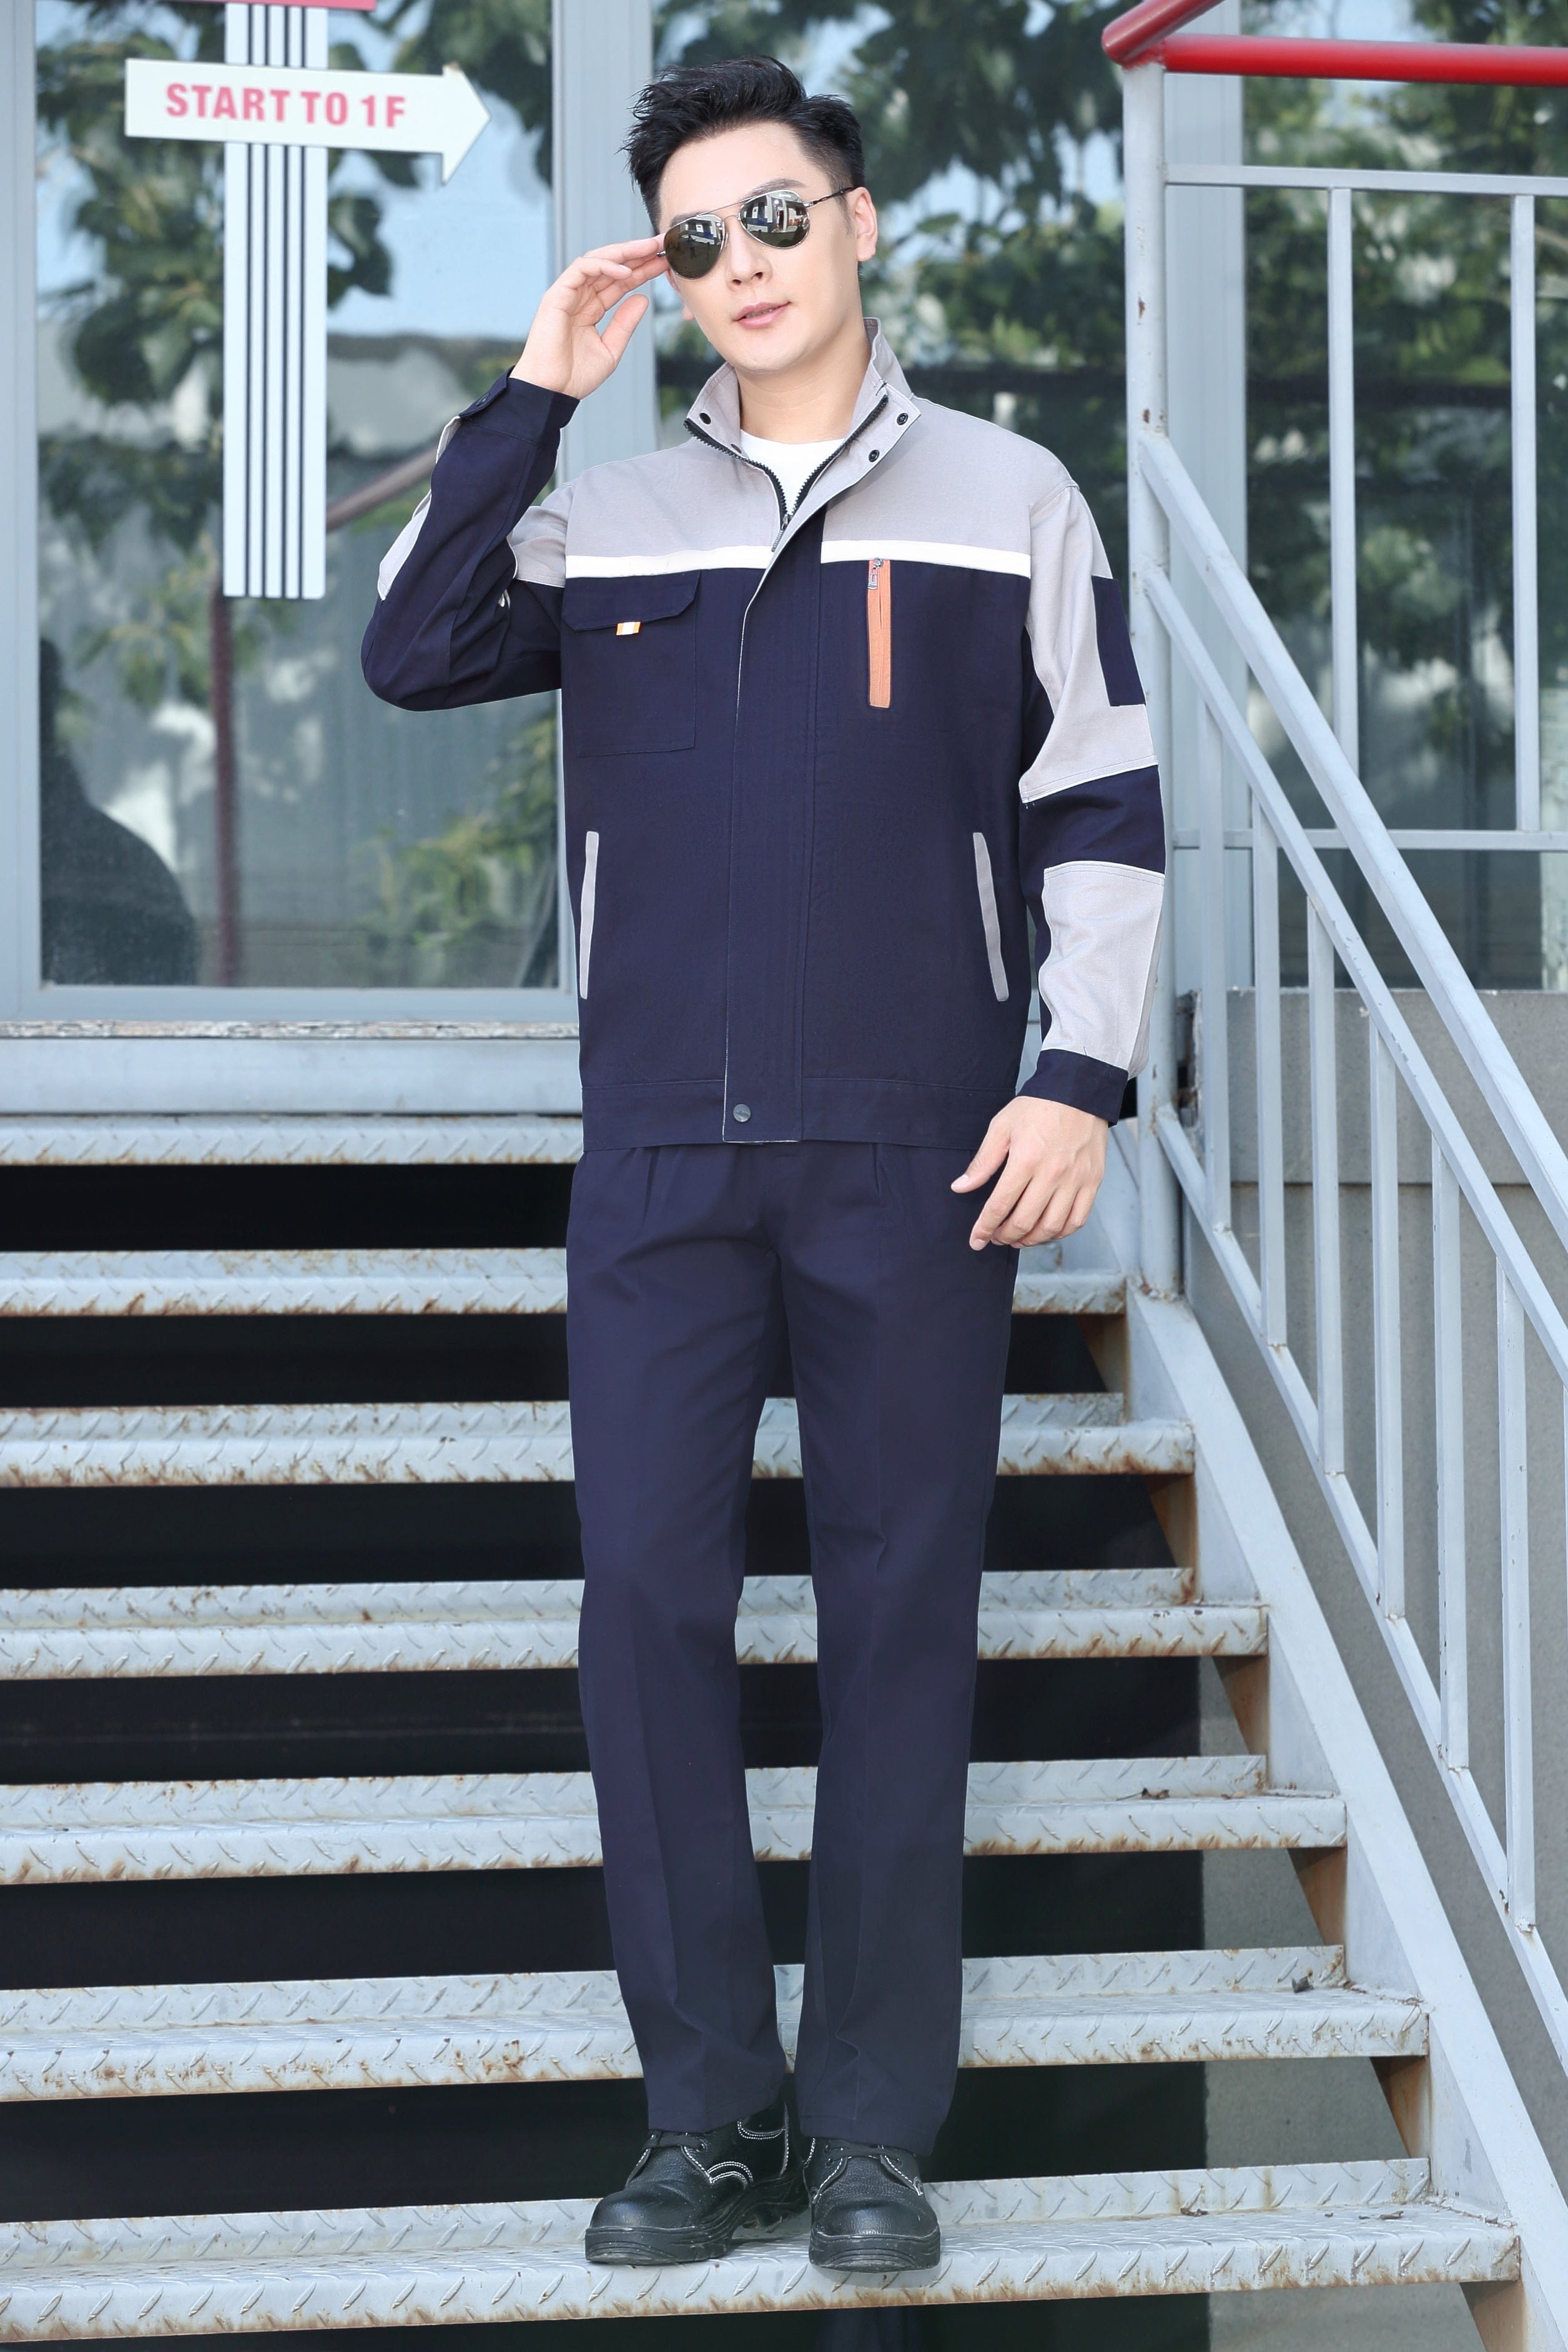 Corals Trading Co. 可樂思百貨商行 纯棉 Autumn and winter long-sleeved pure cotton series workwear SD-PC-W2604